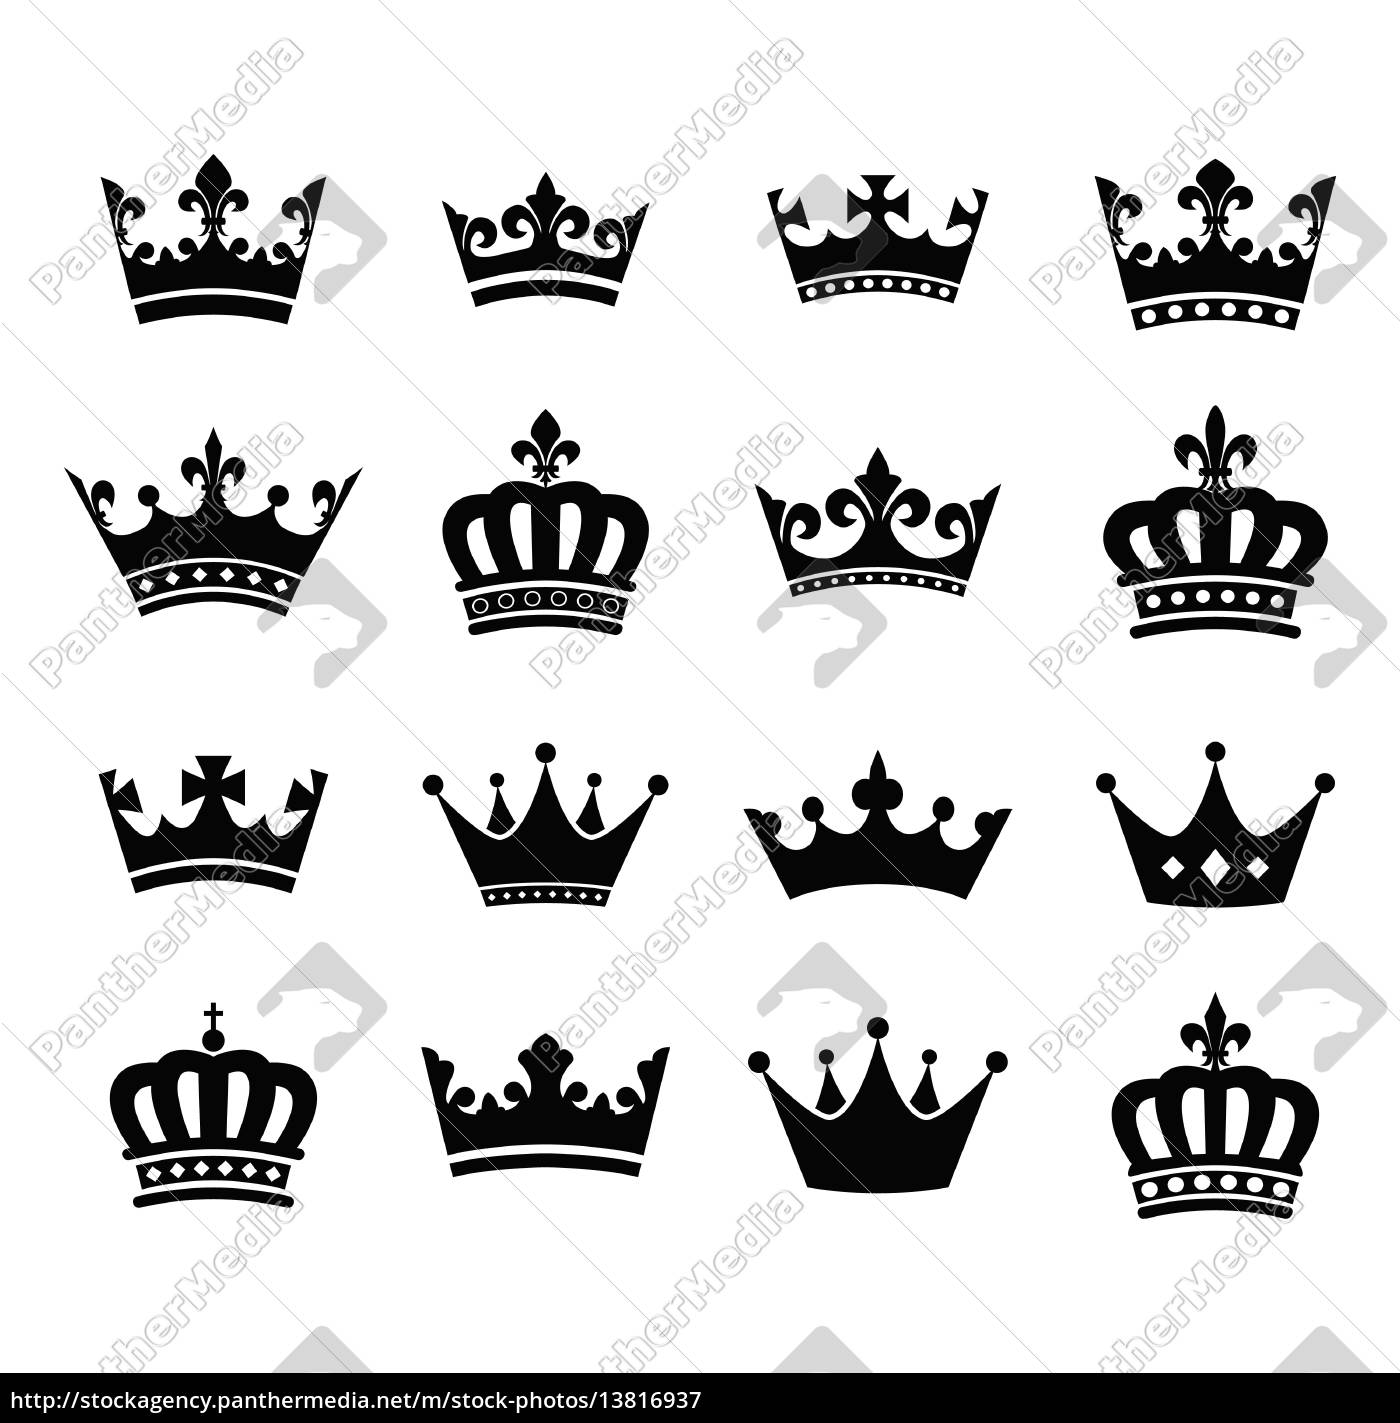 Collection Of Crown Silhouette Symbols Vol 2 Stock Photo Panthermedia Stock Agency